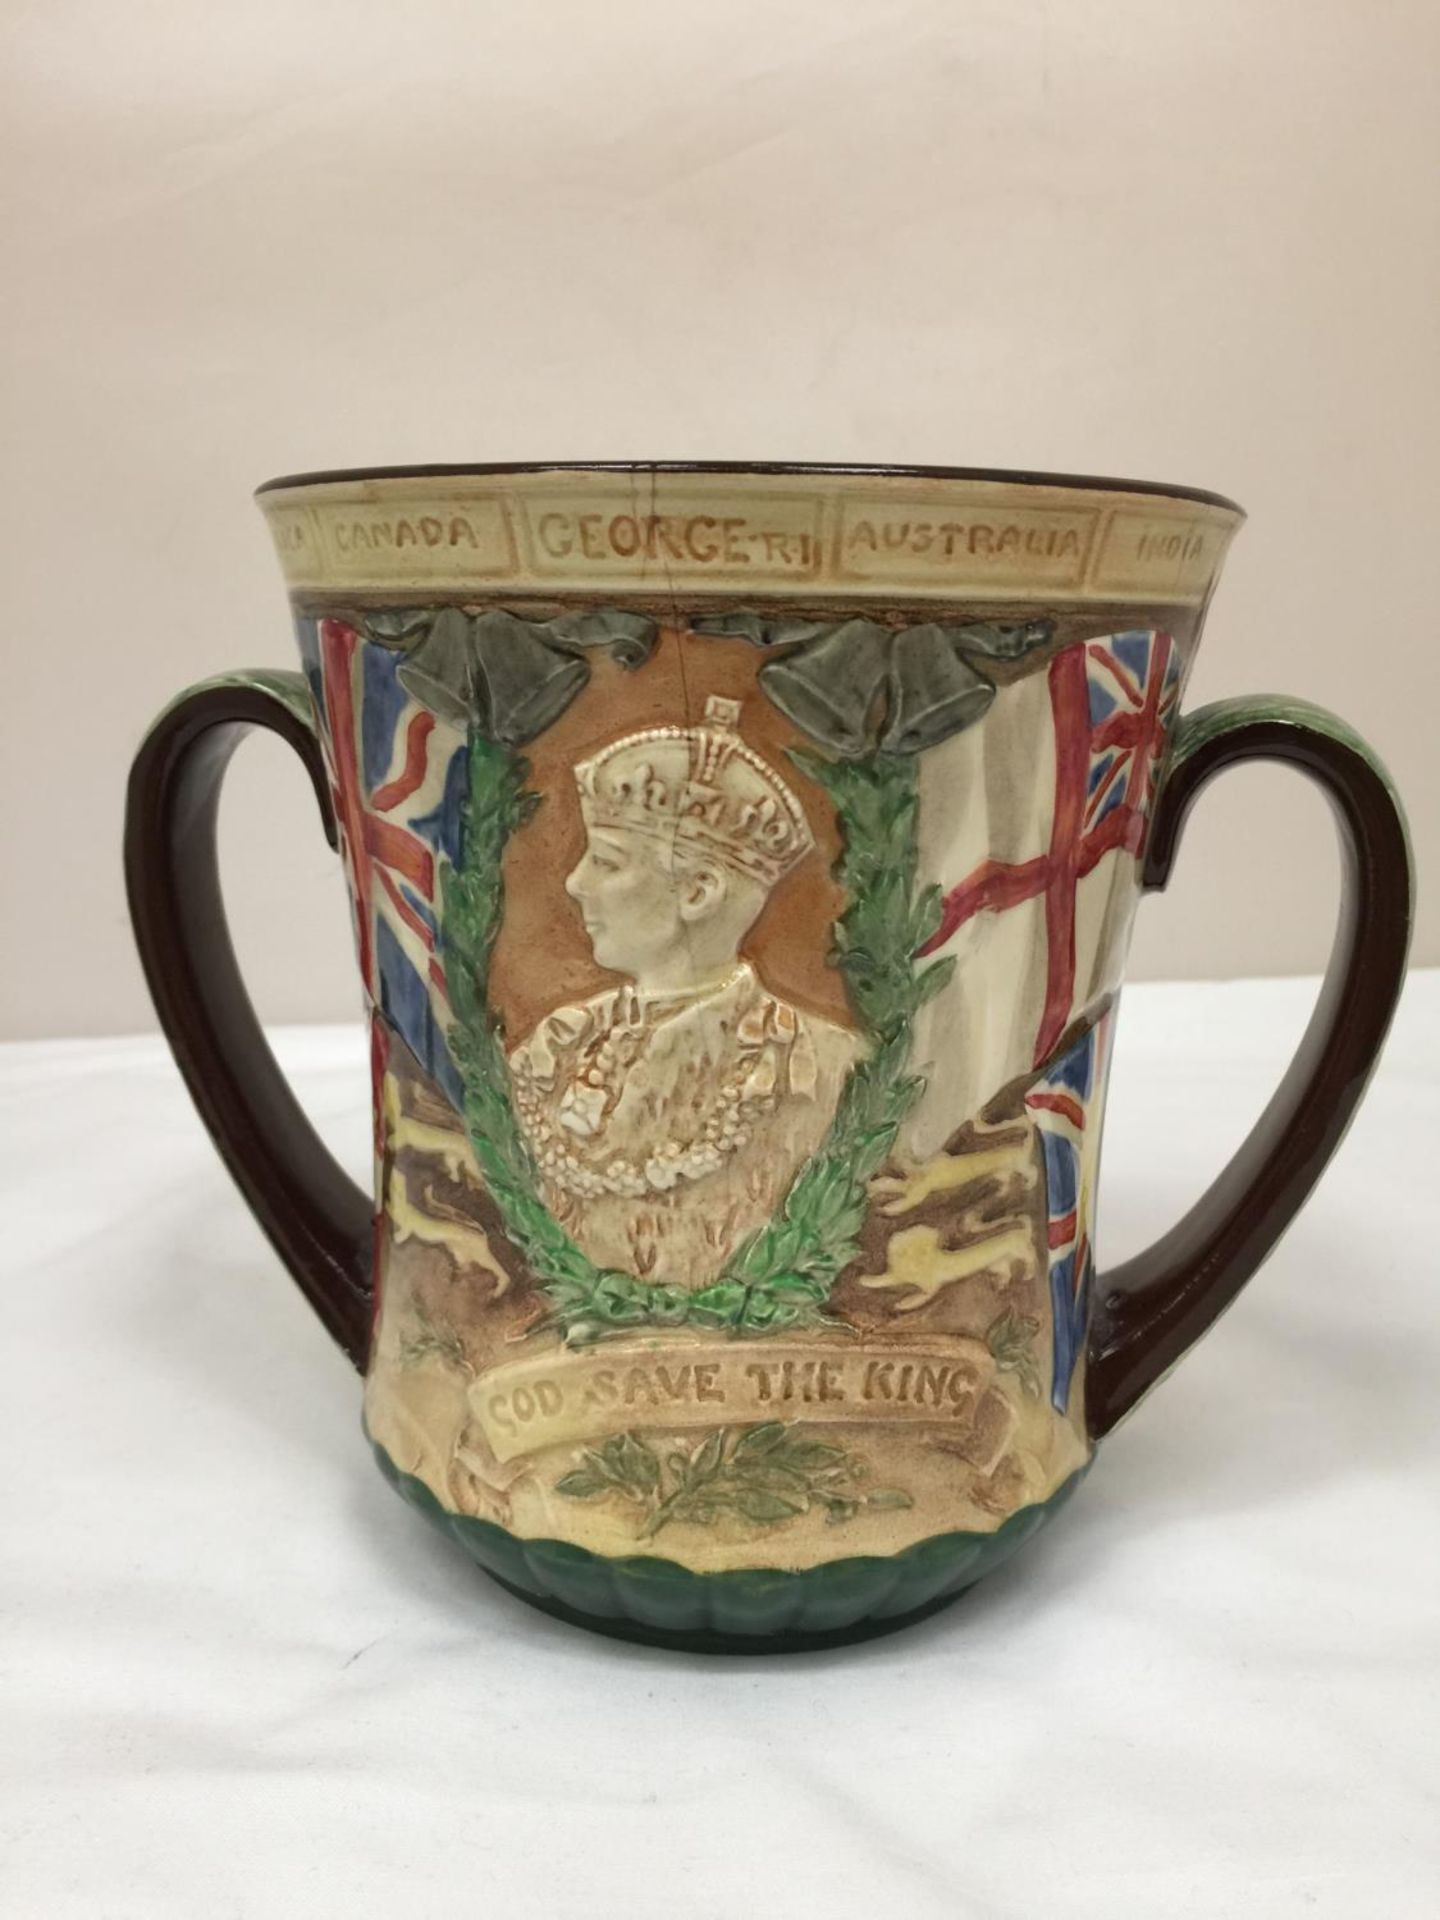 A ROYAL DOULTON TWO HANDLED LOVING CUP - TO COMMEMORATE THE CORONATION OF GEORGE V1 AND